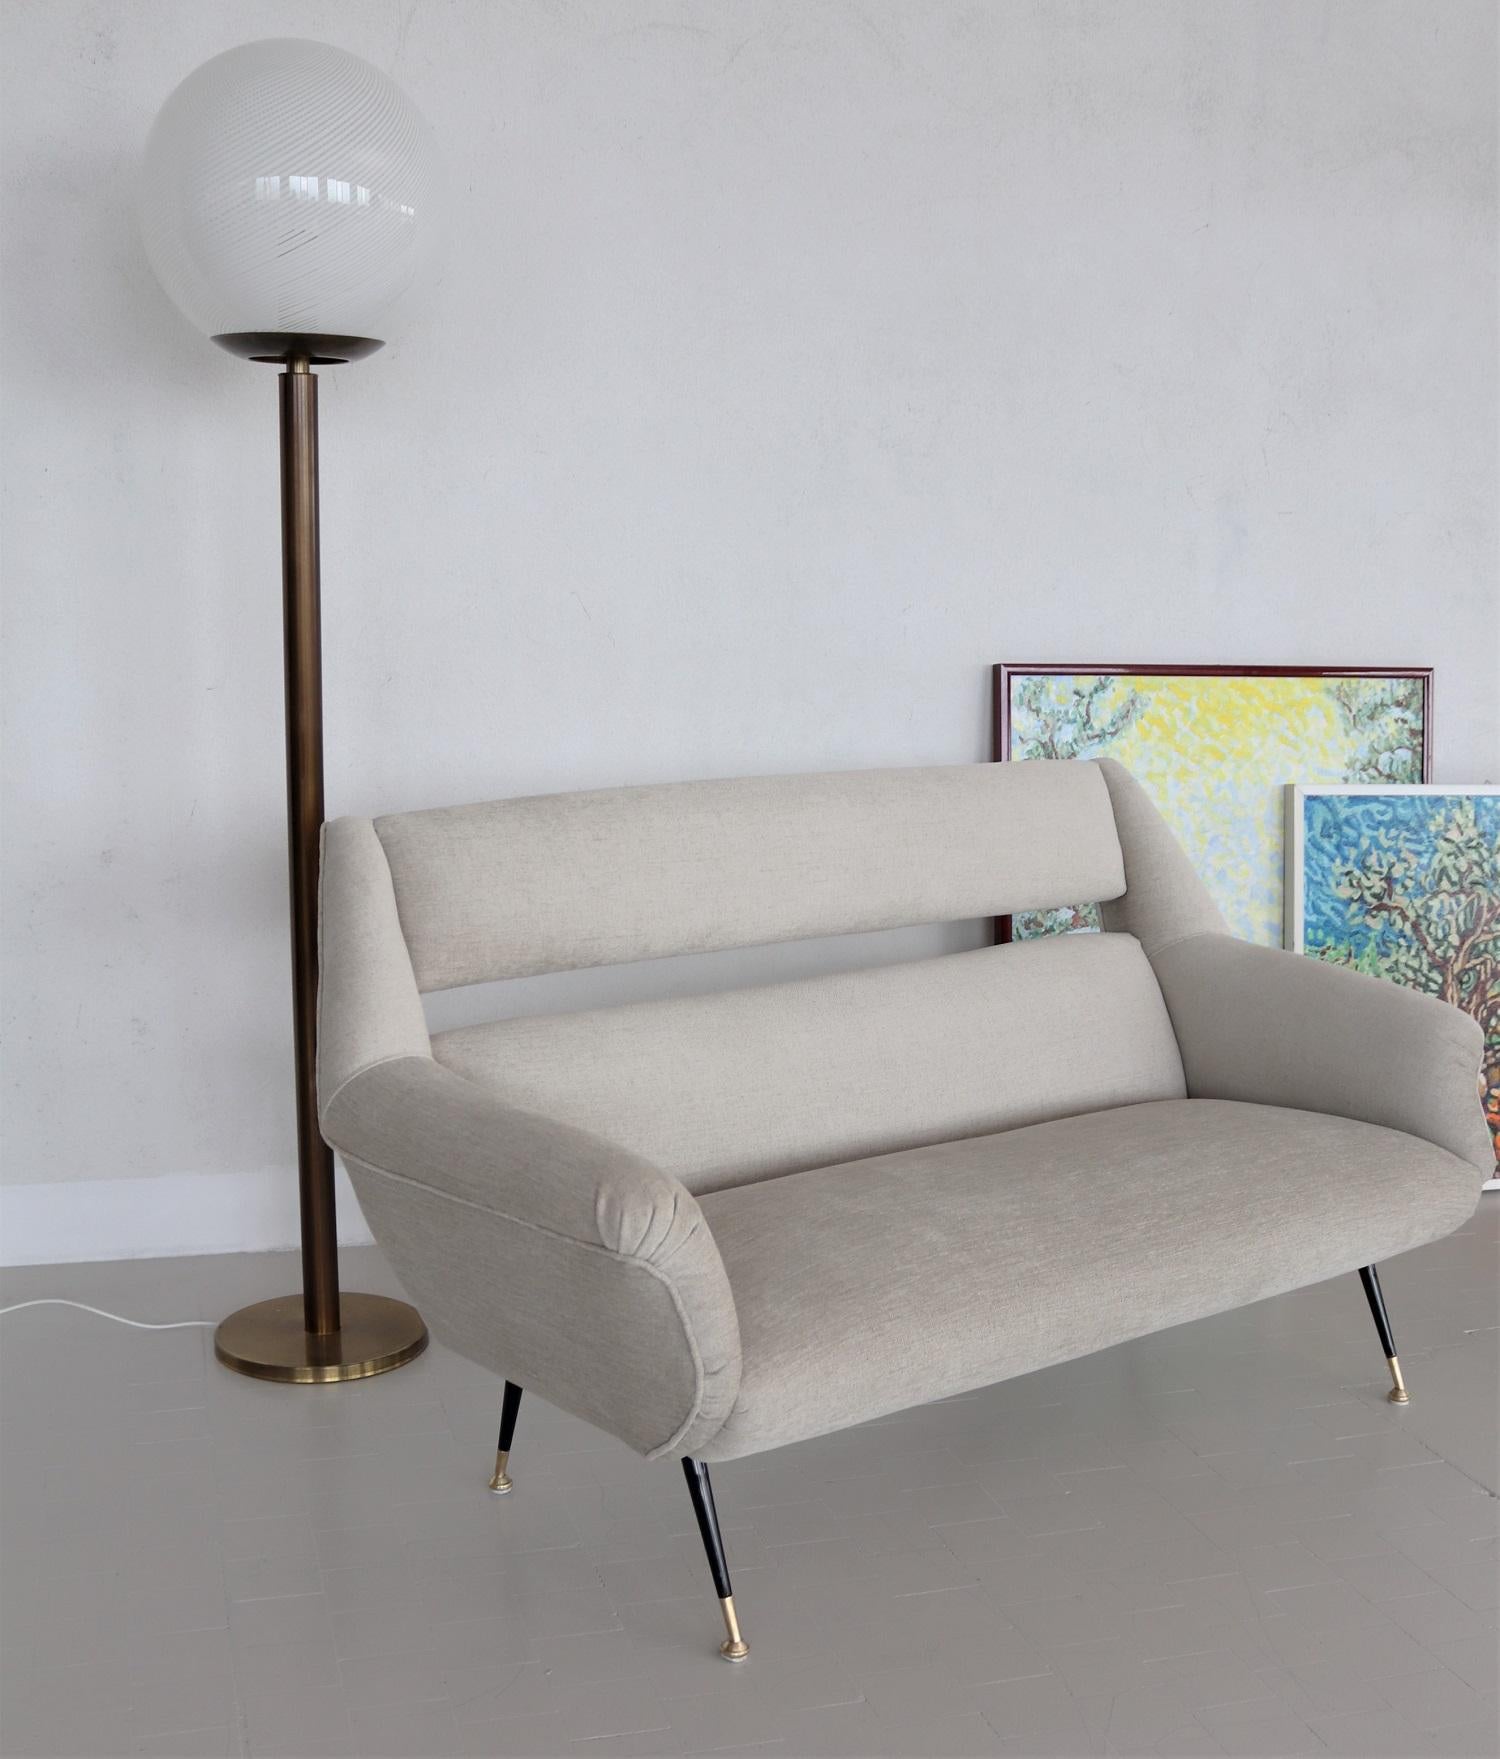 Mid-20th Century Italian Midcentury Sofa with New Upholstery and Brass Stiletto Feet, 1950s